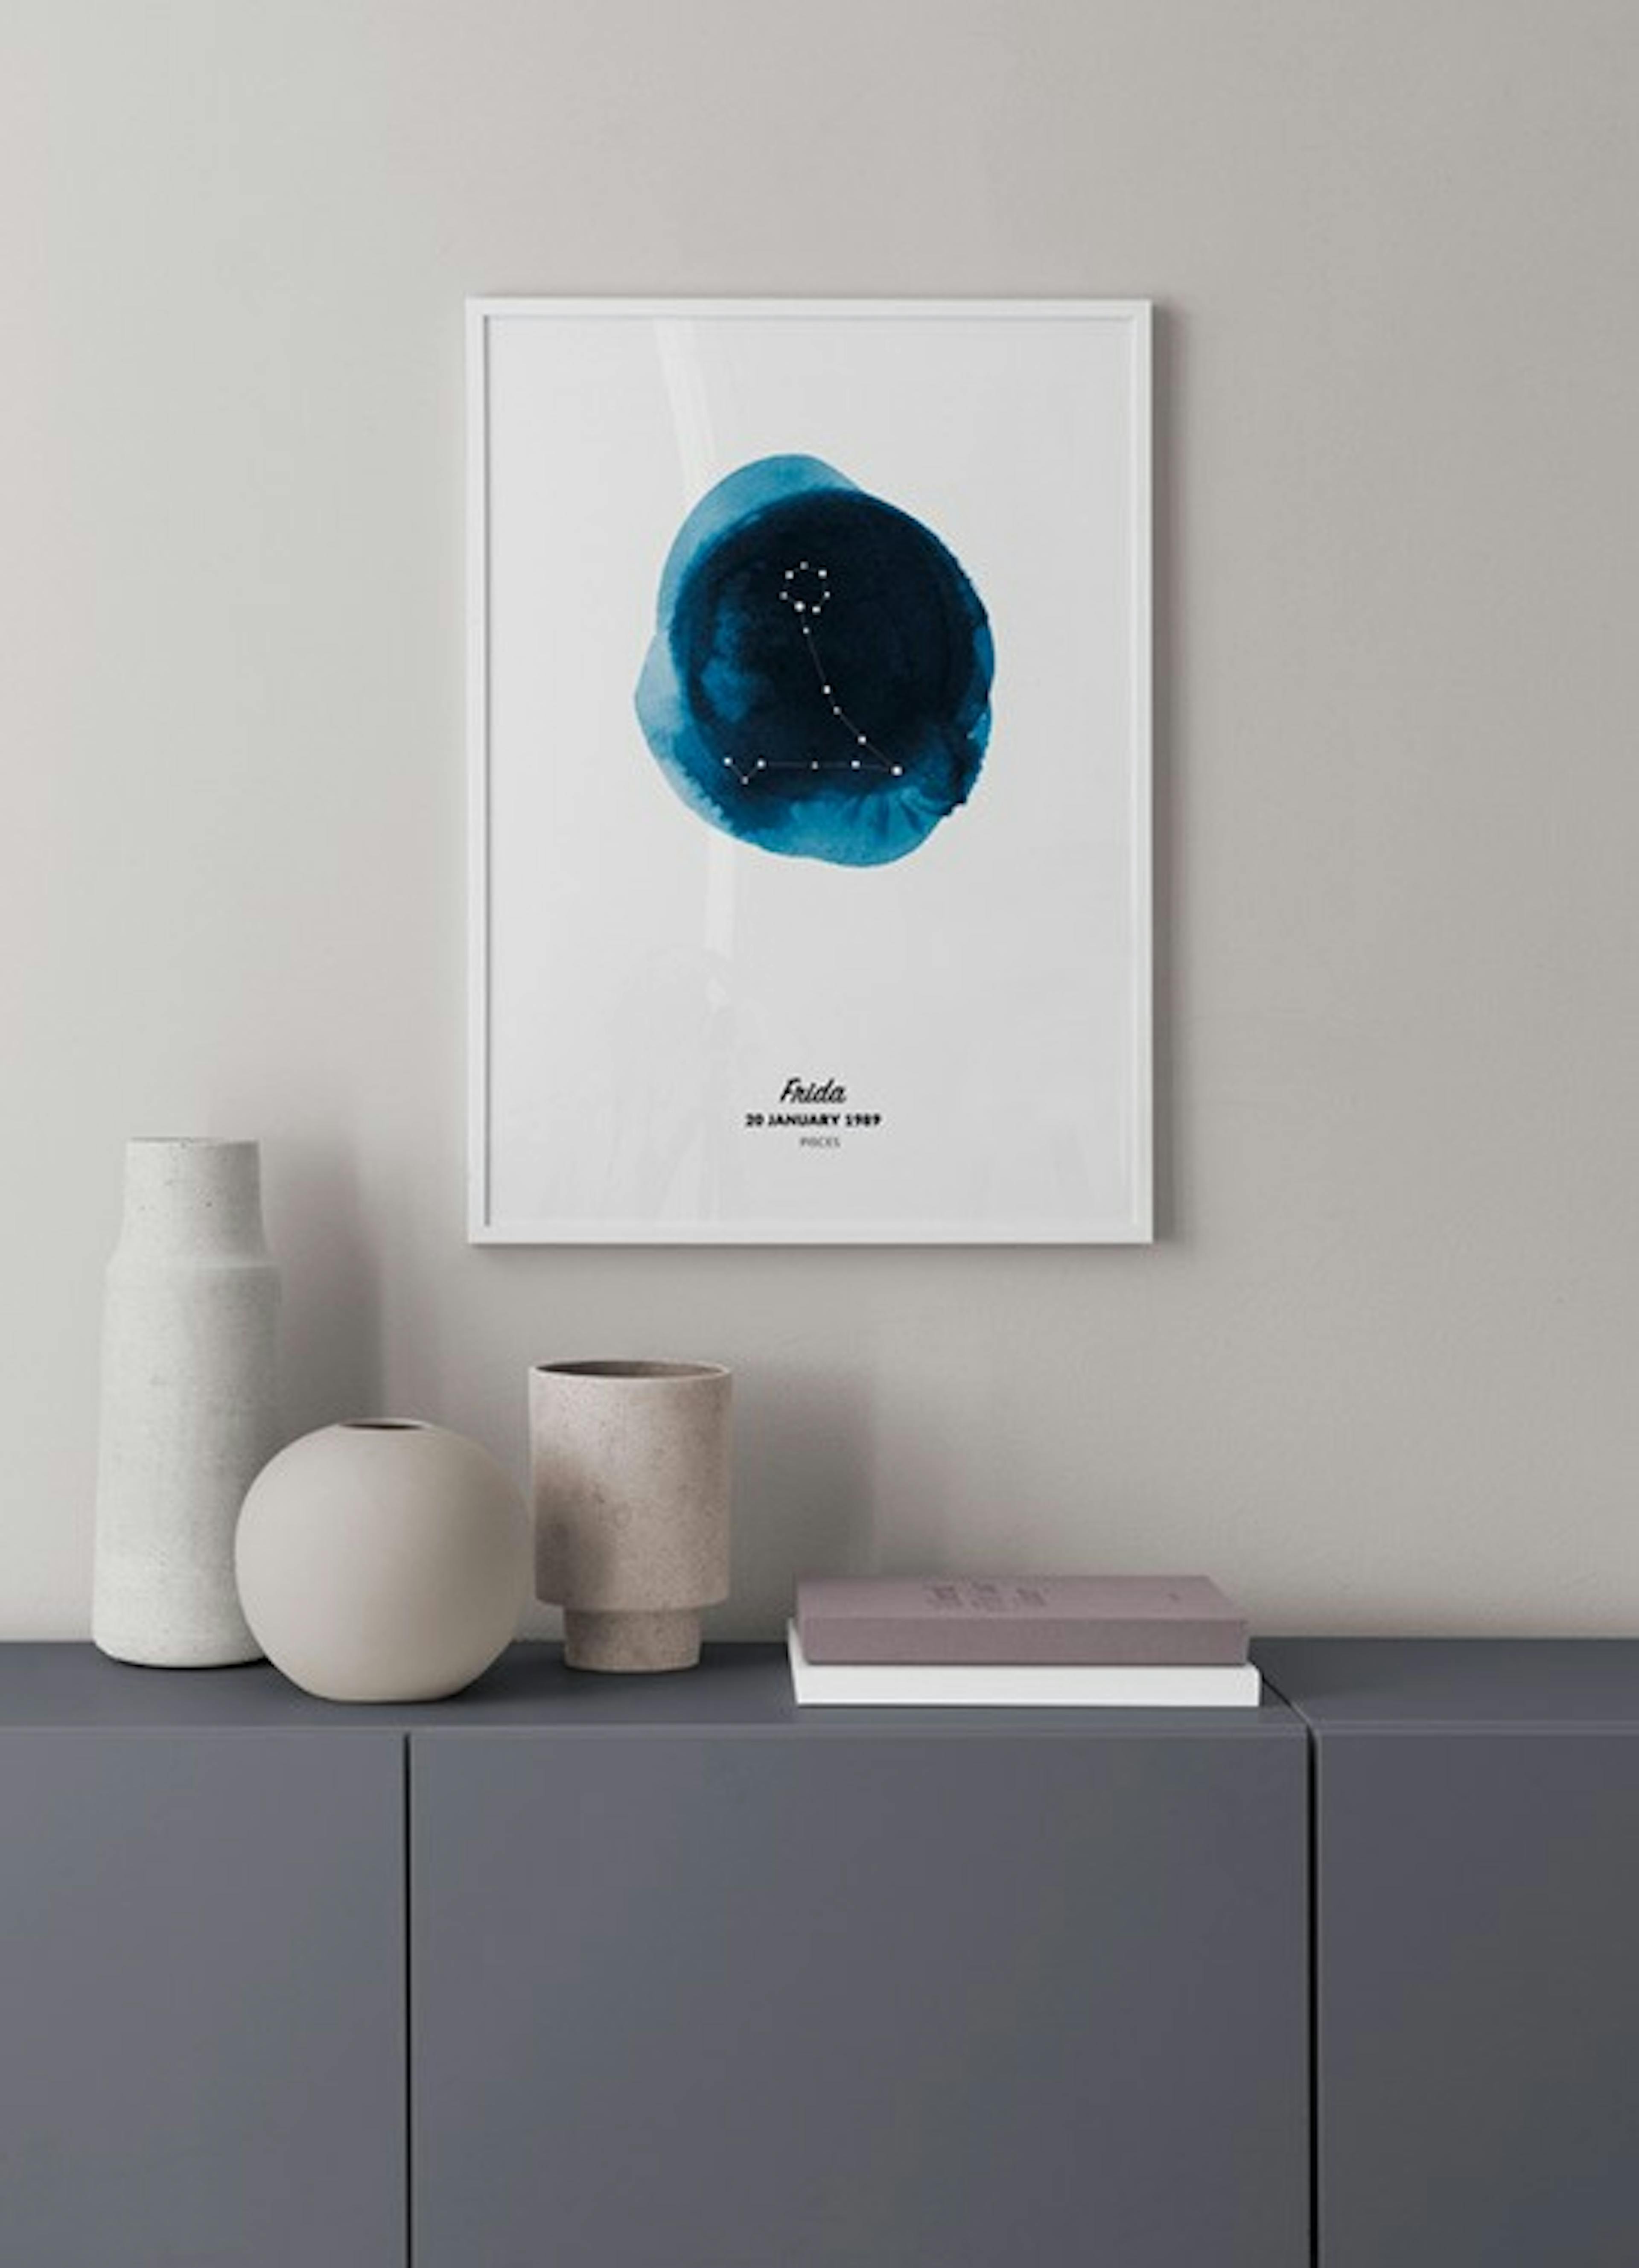 Zodiac Sign Pisces Personal Poster